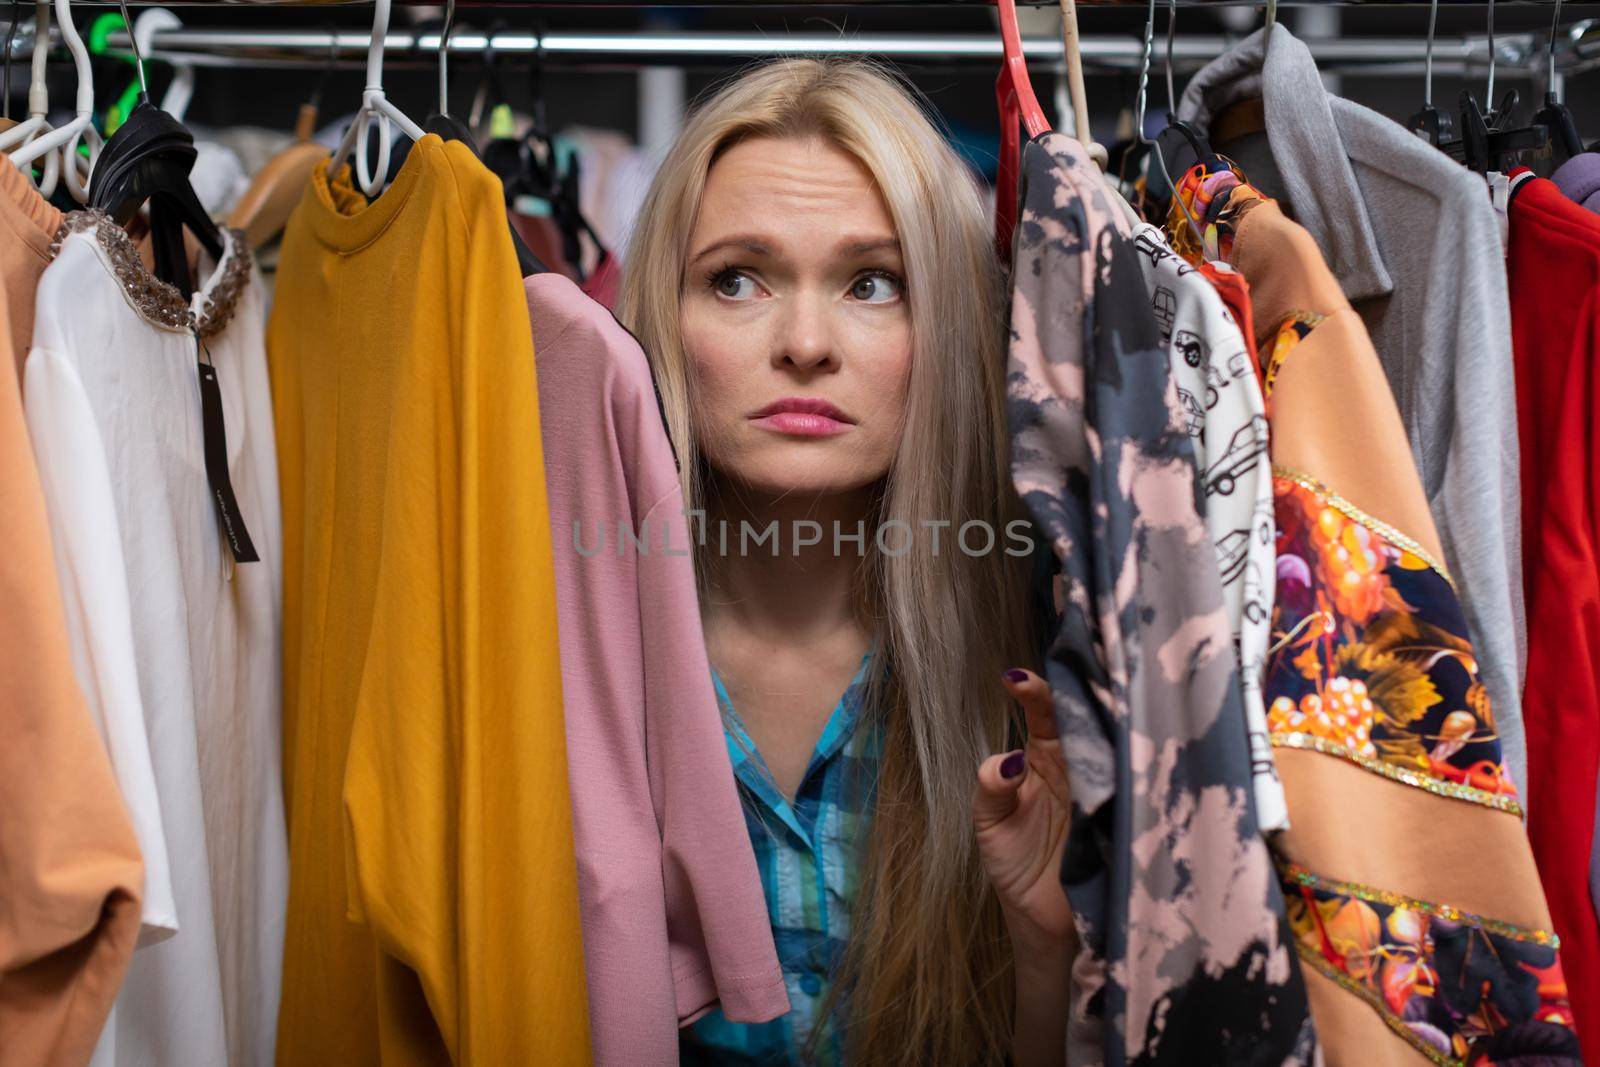 Girl worried because she hasn't found the dress she dreamed of. A blonde girl among hangers of clothes with a grim face.